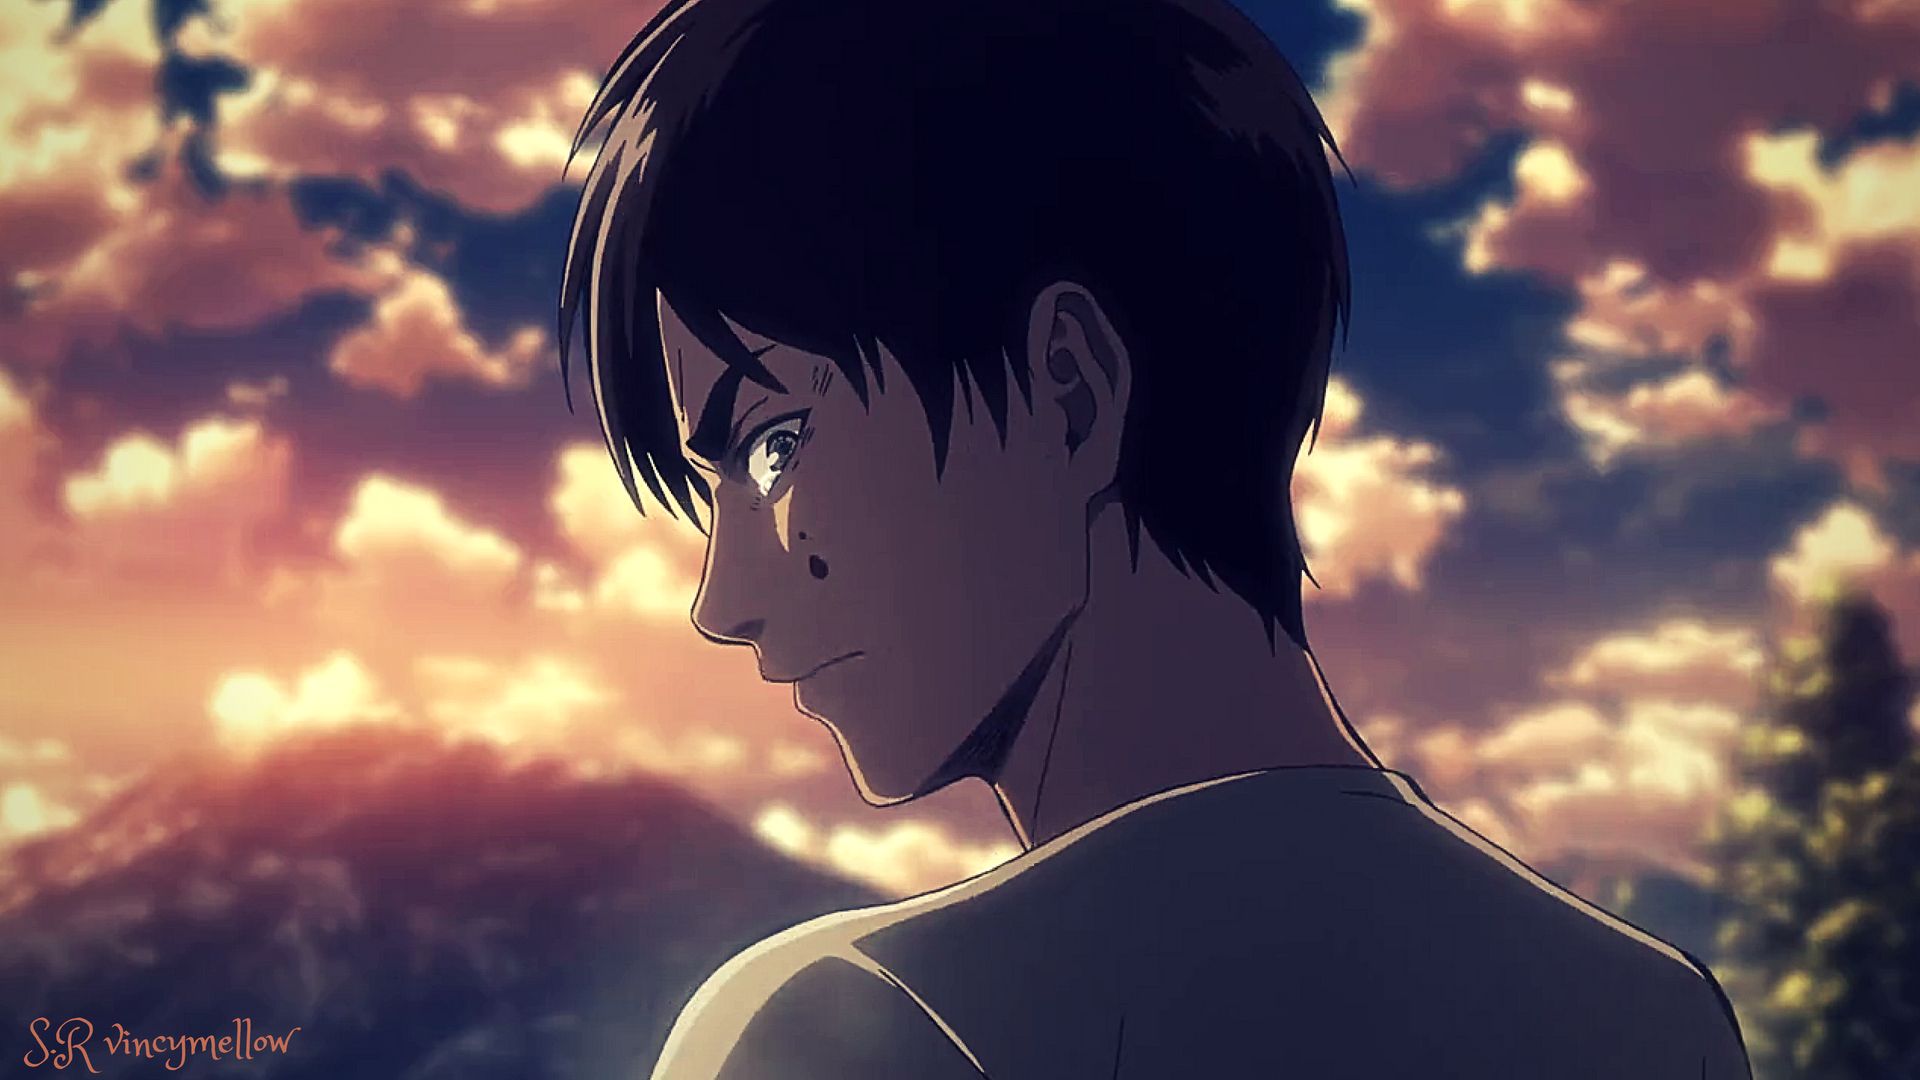 Eren Yeager Angry Crying face.. Attack on Titan.. Anime Desktop Wallpaper. Attack on titan season, Attack on titan anime, Attack on titan season 2